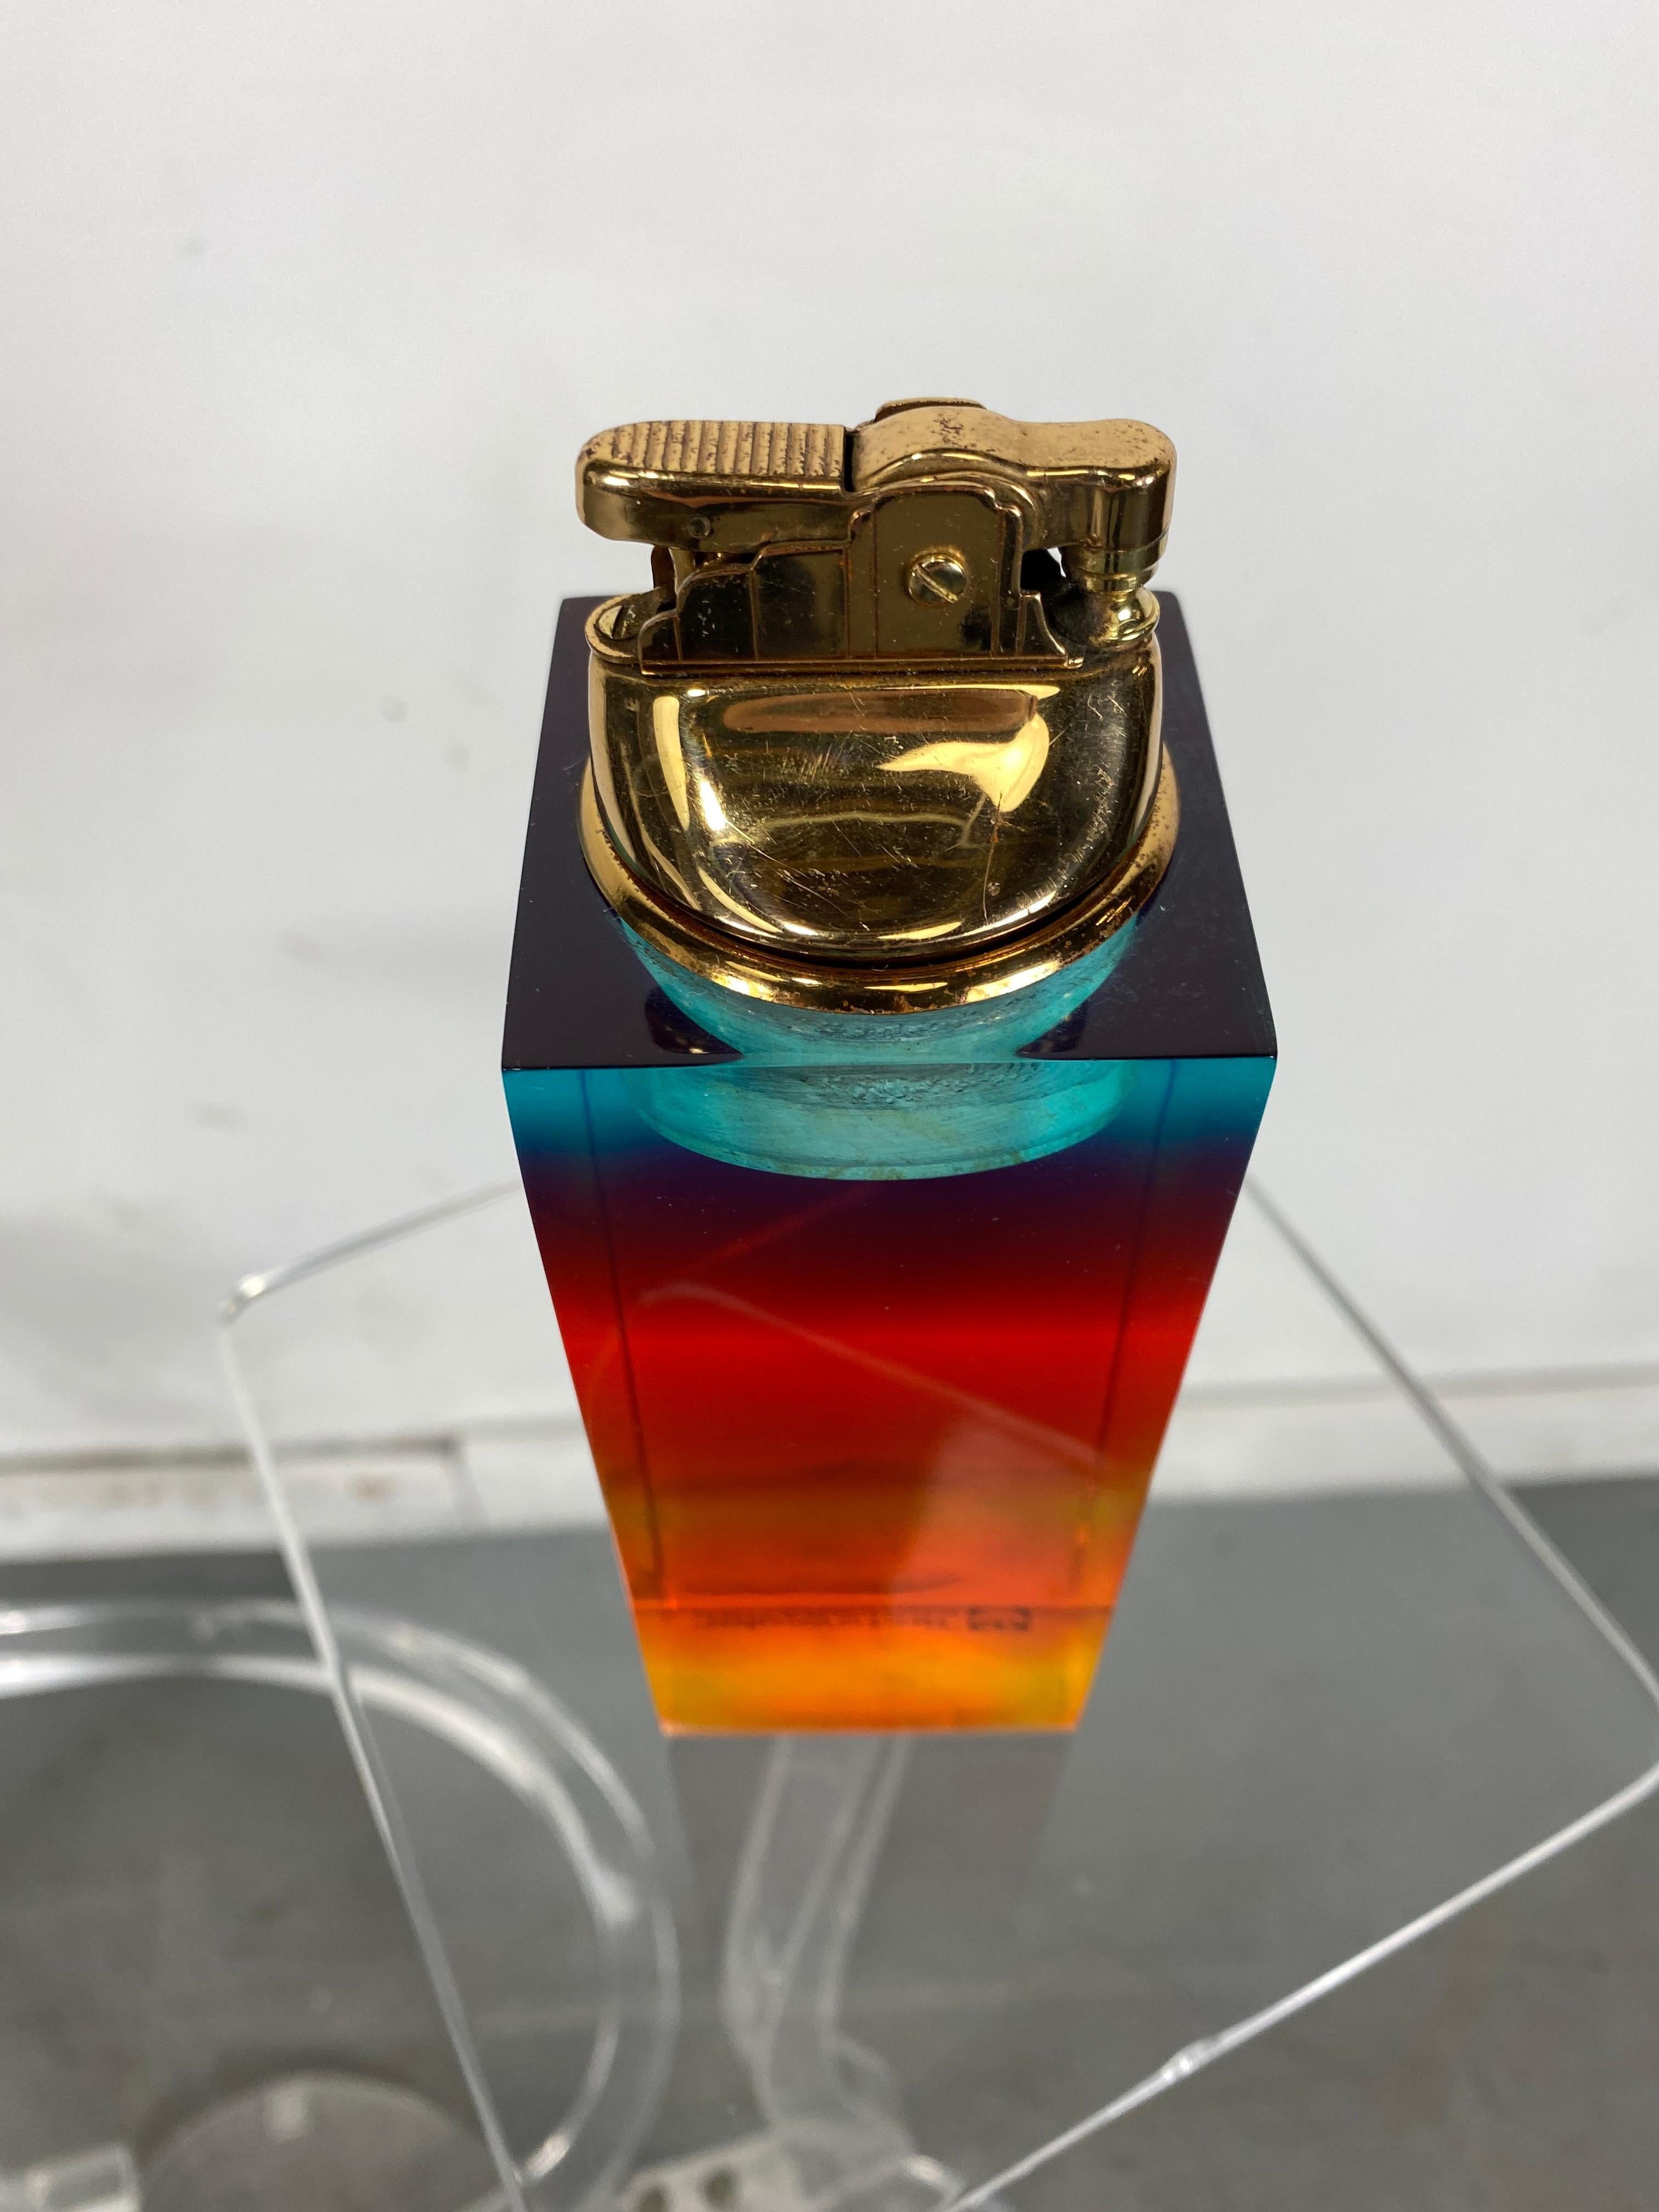 Unusual modernist multi-color acrylic / Lucite cigarette lighter, advertising Technicolor Corporation. Appears to be new/old stock, never used. Possible award or employee give away.